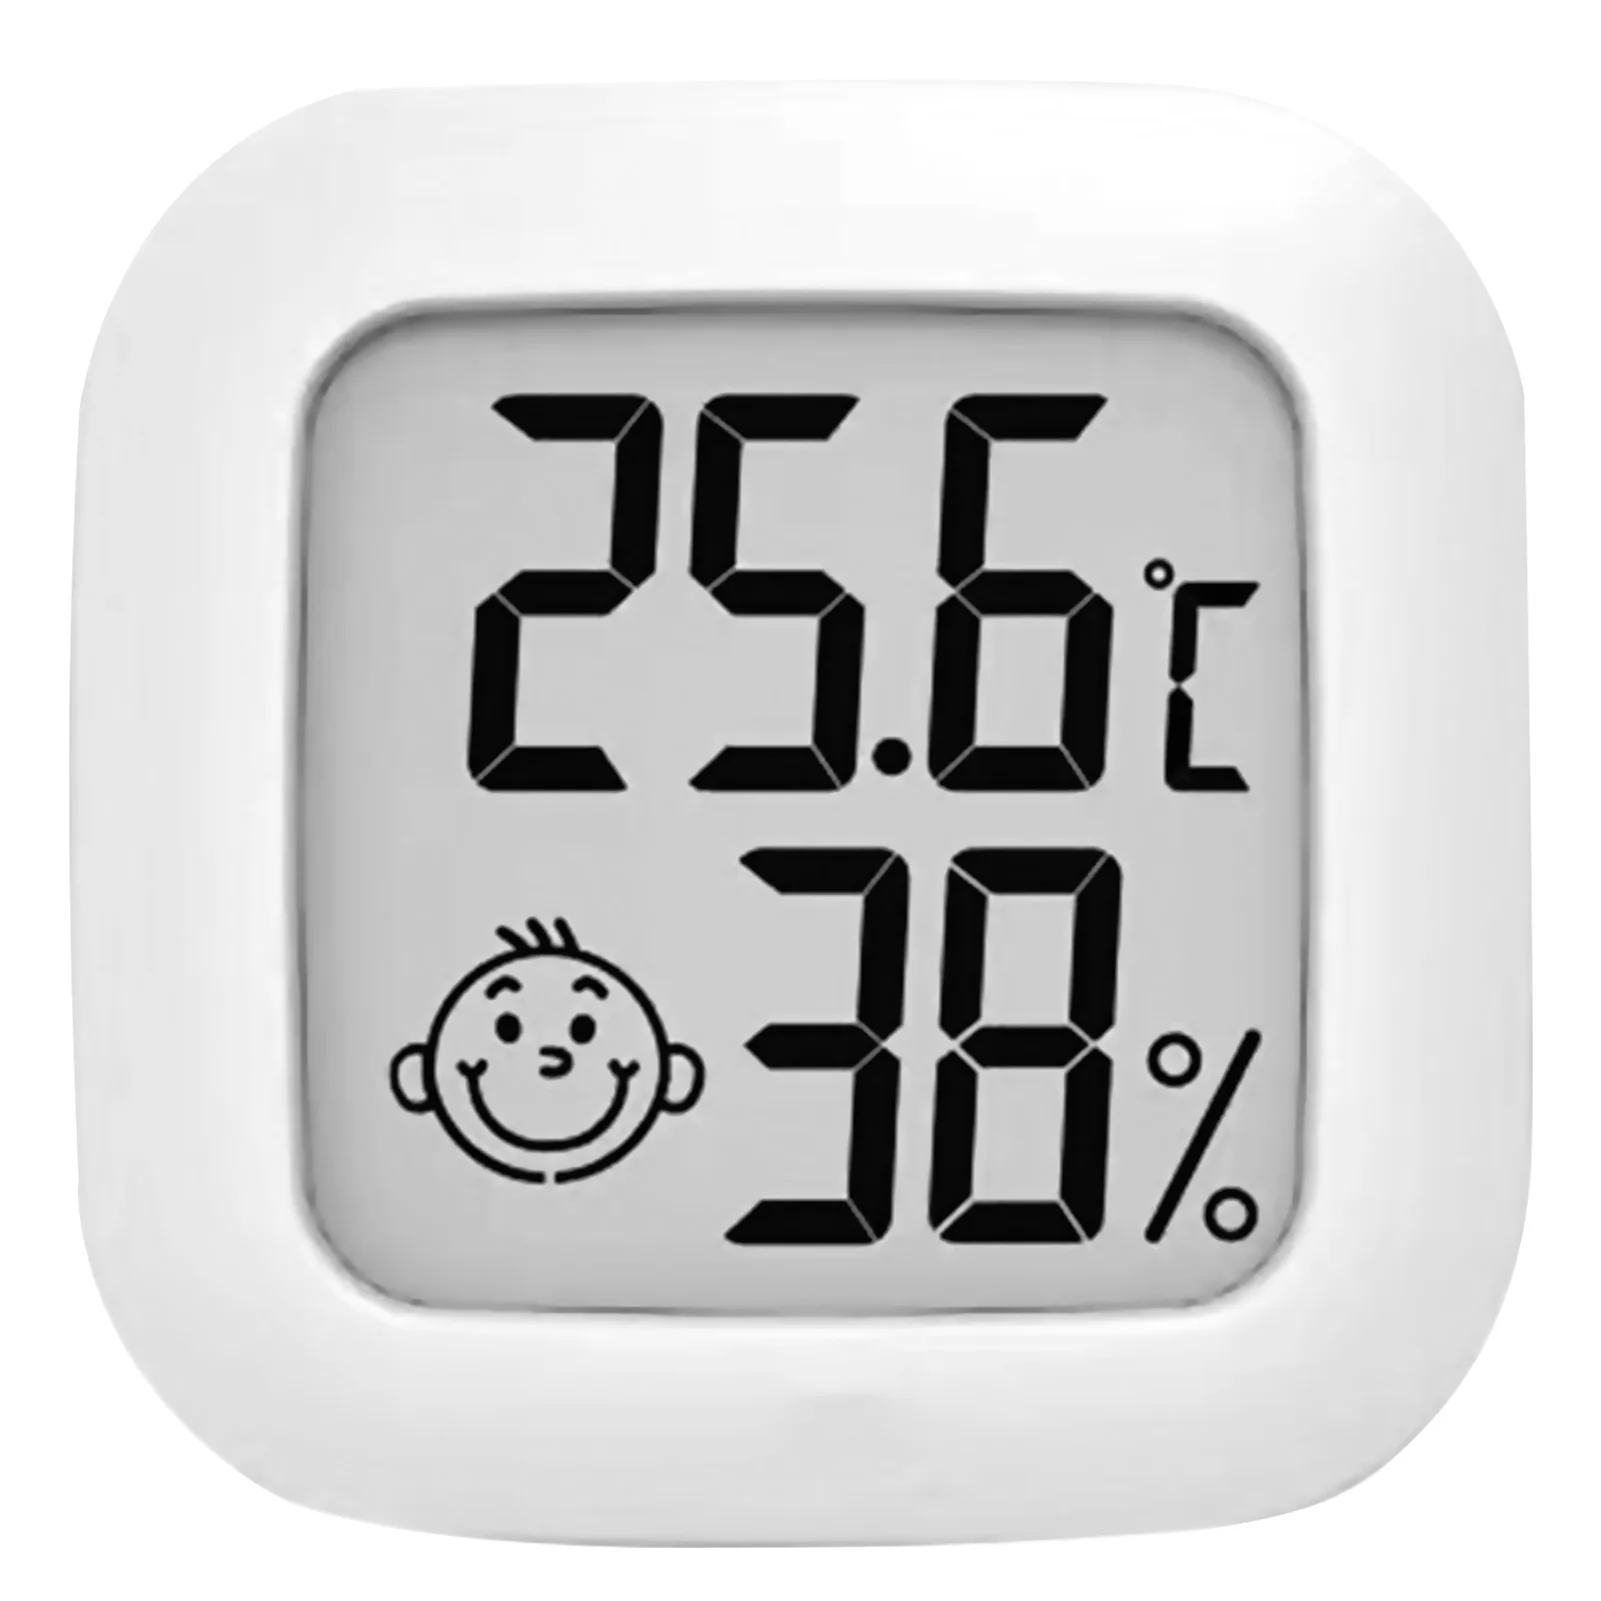 Digital Wireless Hygrometer Humidity Gauge Temperature Monitor for Home  Greenhouse Wholesale - China Indoor Outdoor Thermometer, Digital  Thermometer and Humidity Meter